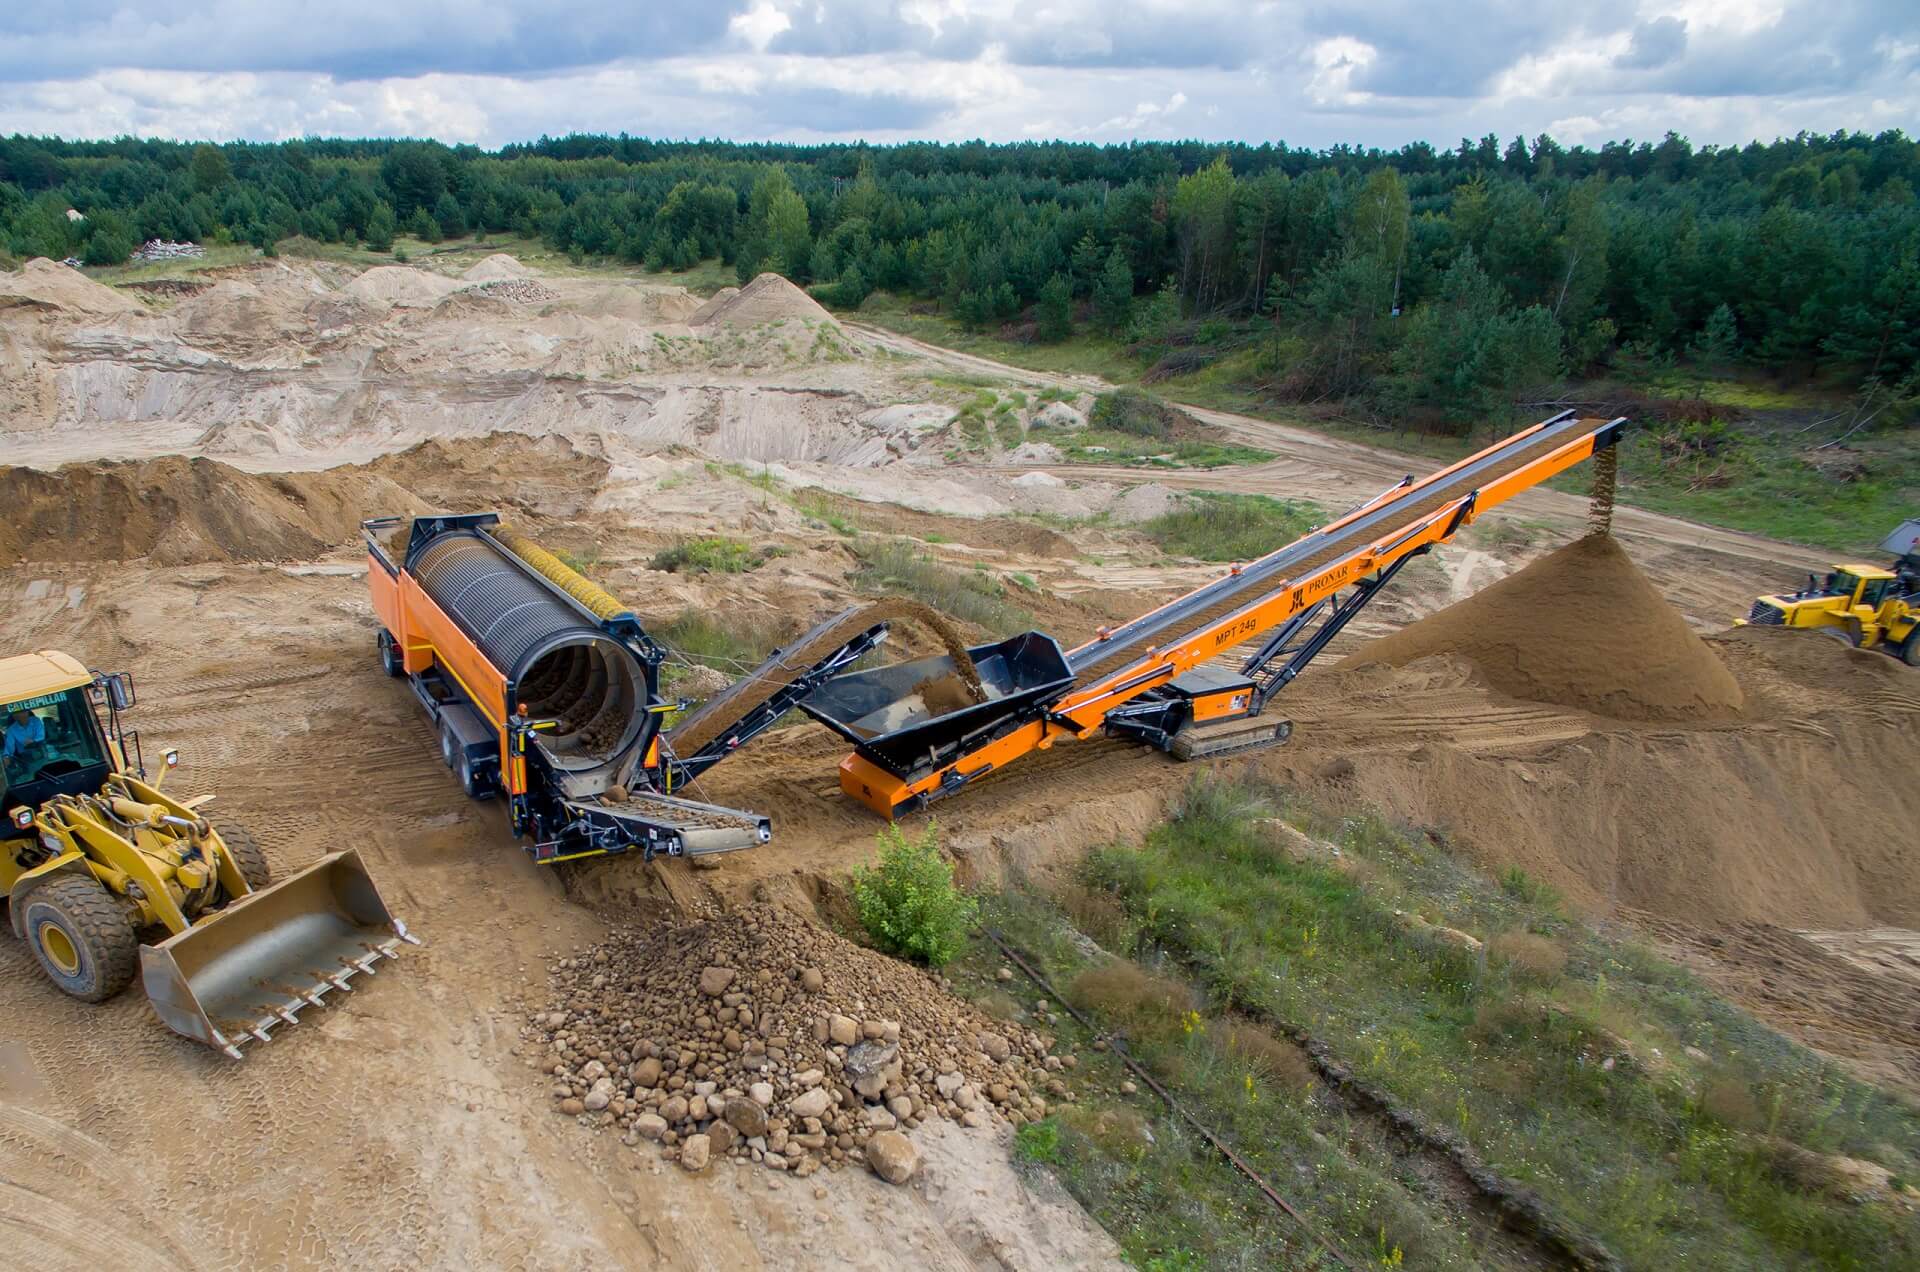 Mobile Belt Conveyor MPT 24g. The height-adjustable conveyor belt runs on caterpillars in the area of ​​an opencast mine. Next to the fraction divider